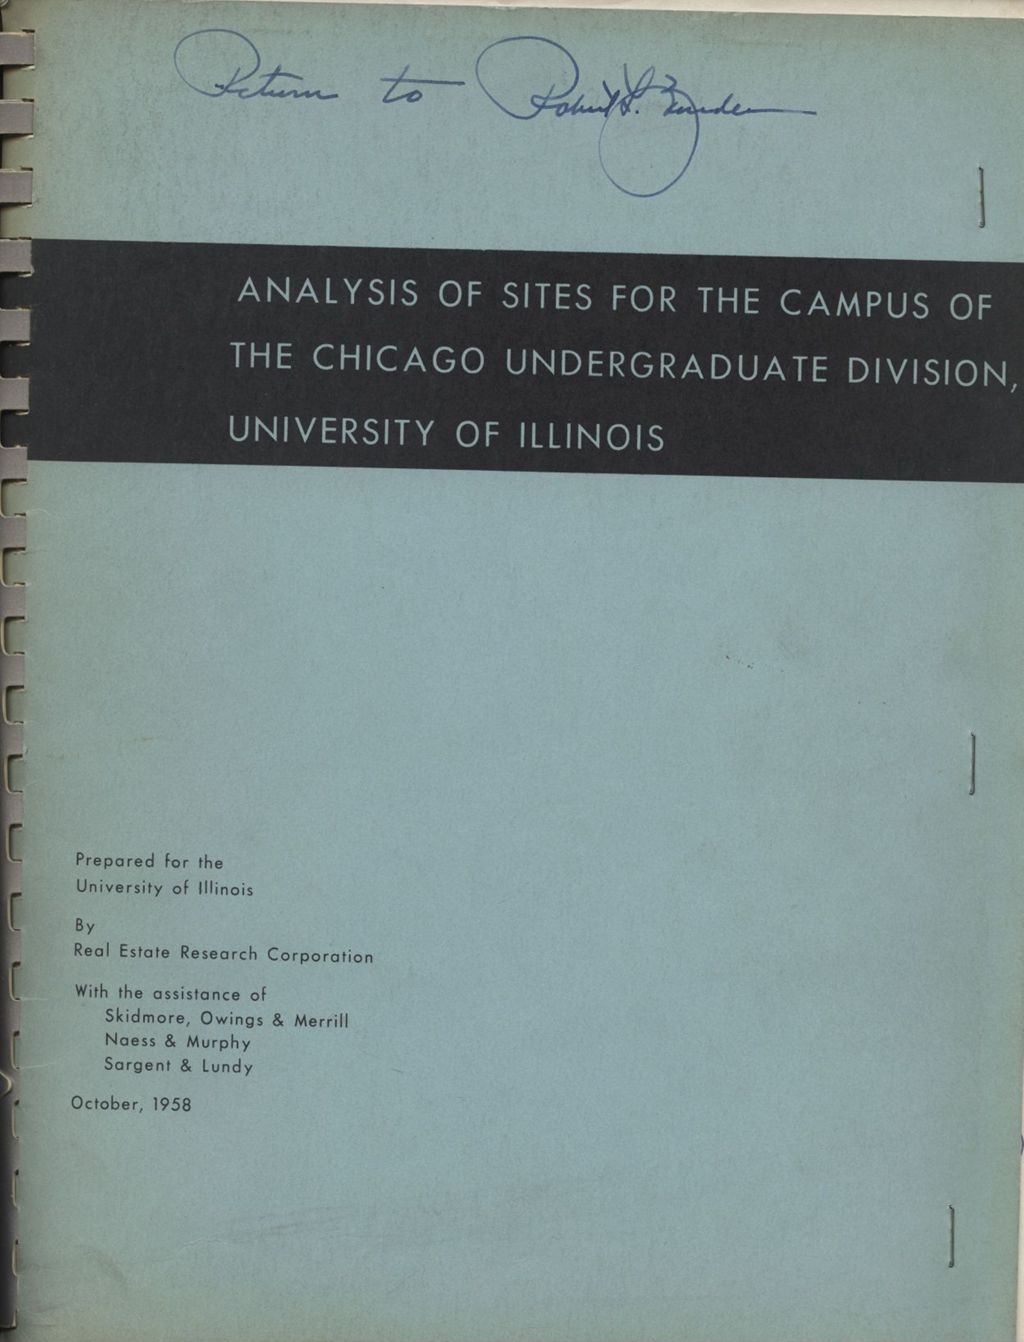 Analysis of Sites for the Campus of the Chicago Undergraduate Division, University of Illinois